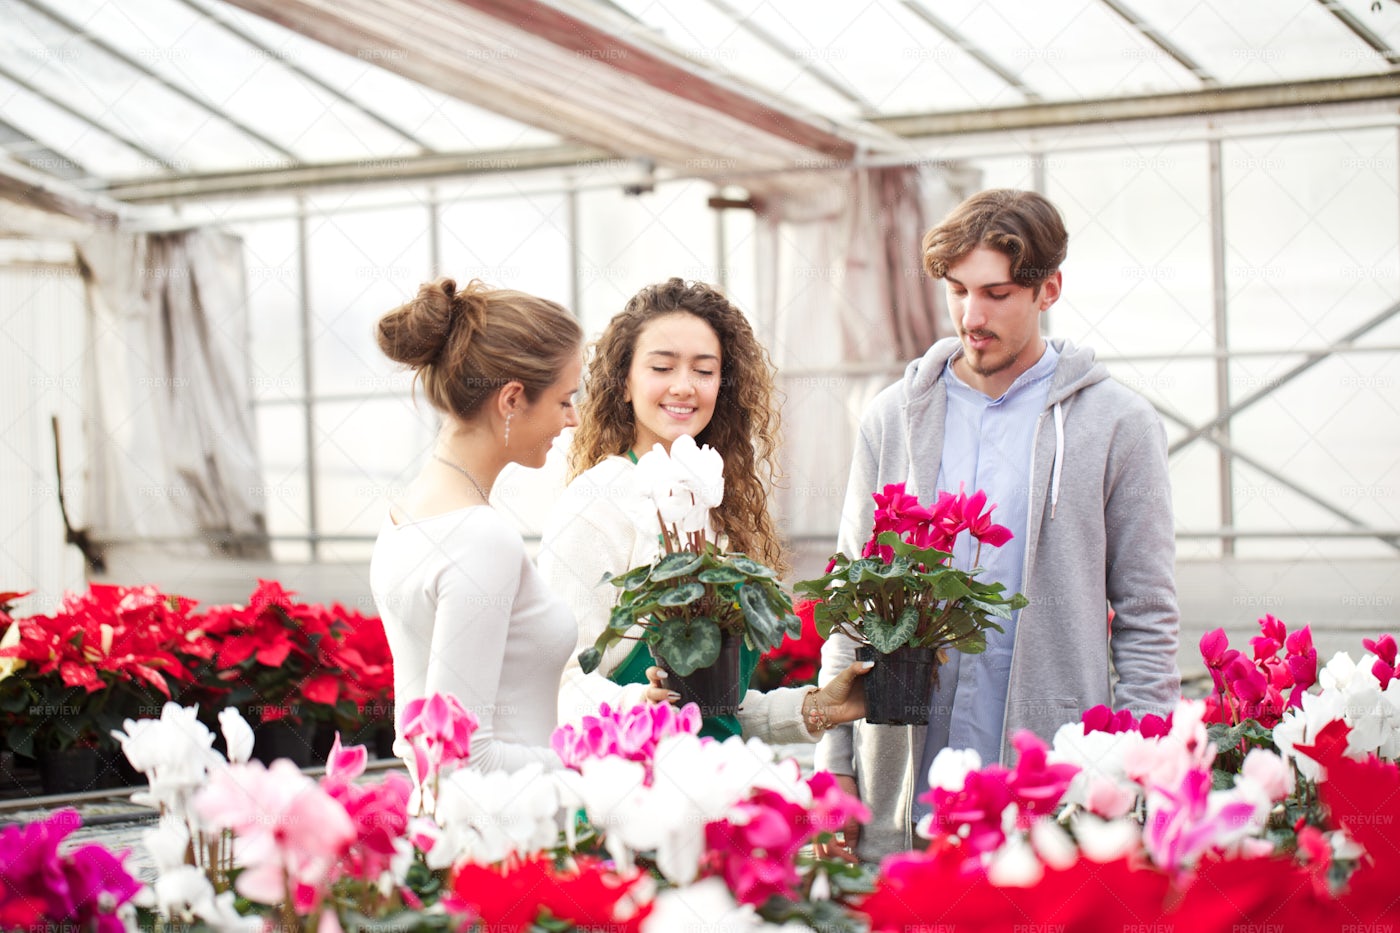 Customers Buying Flowers: Stock Photos